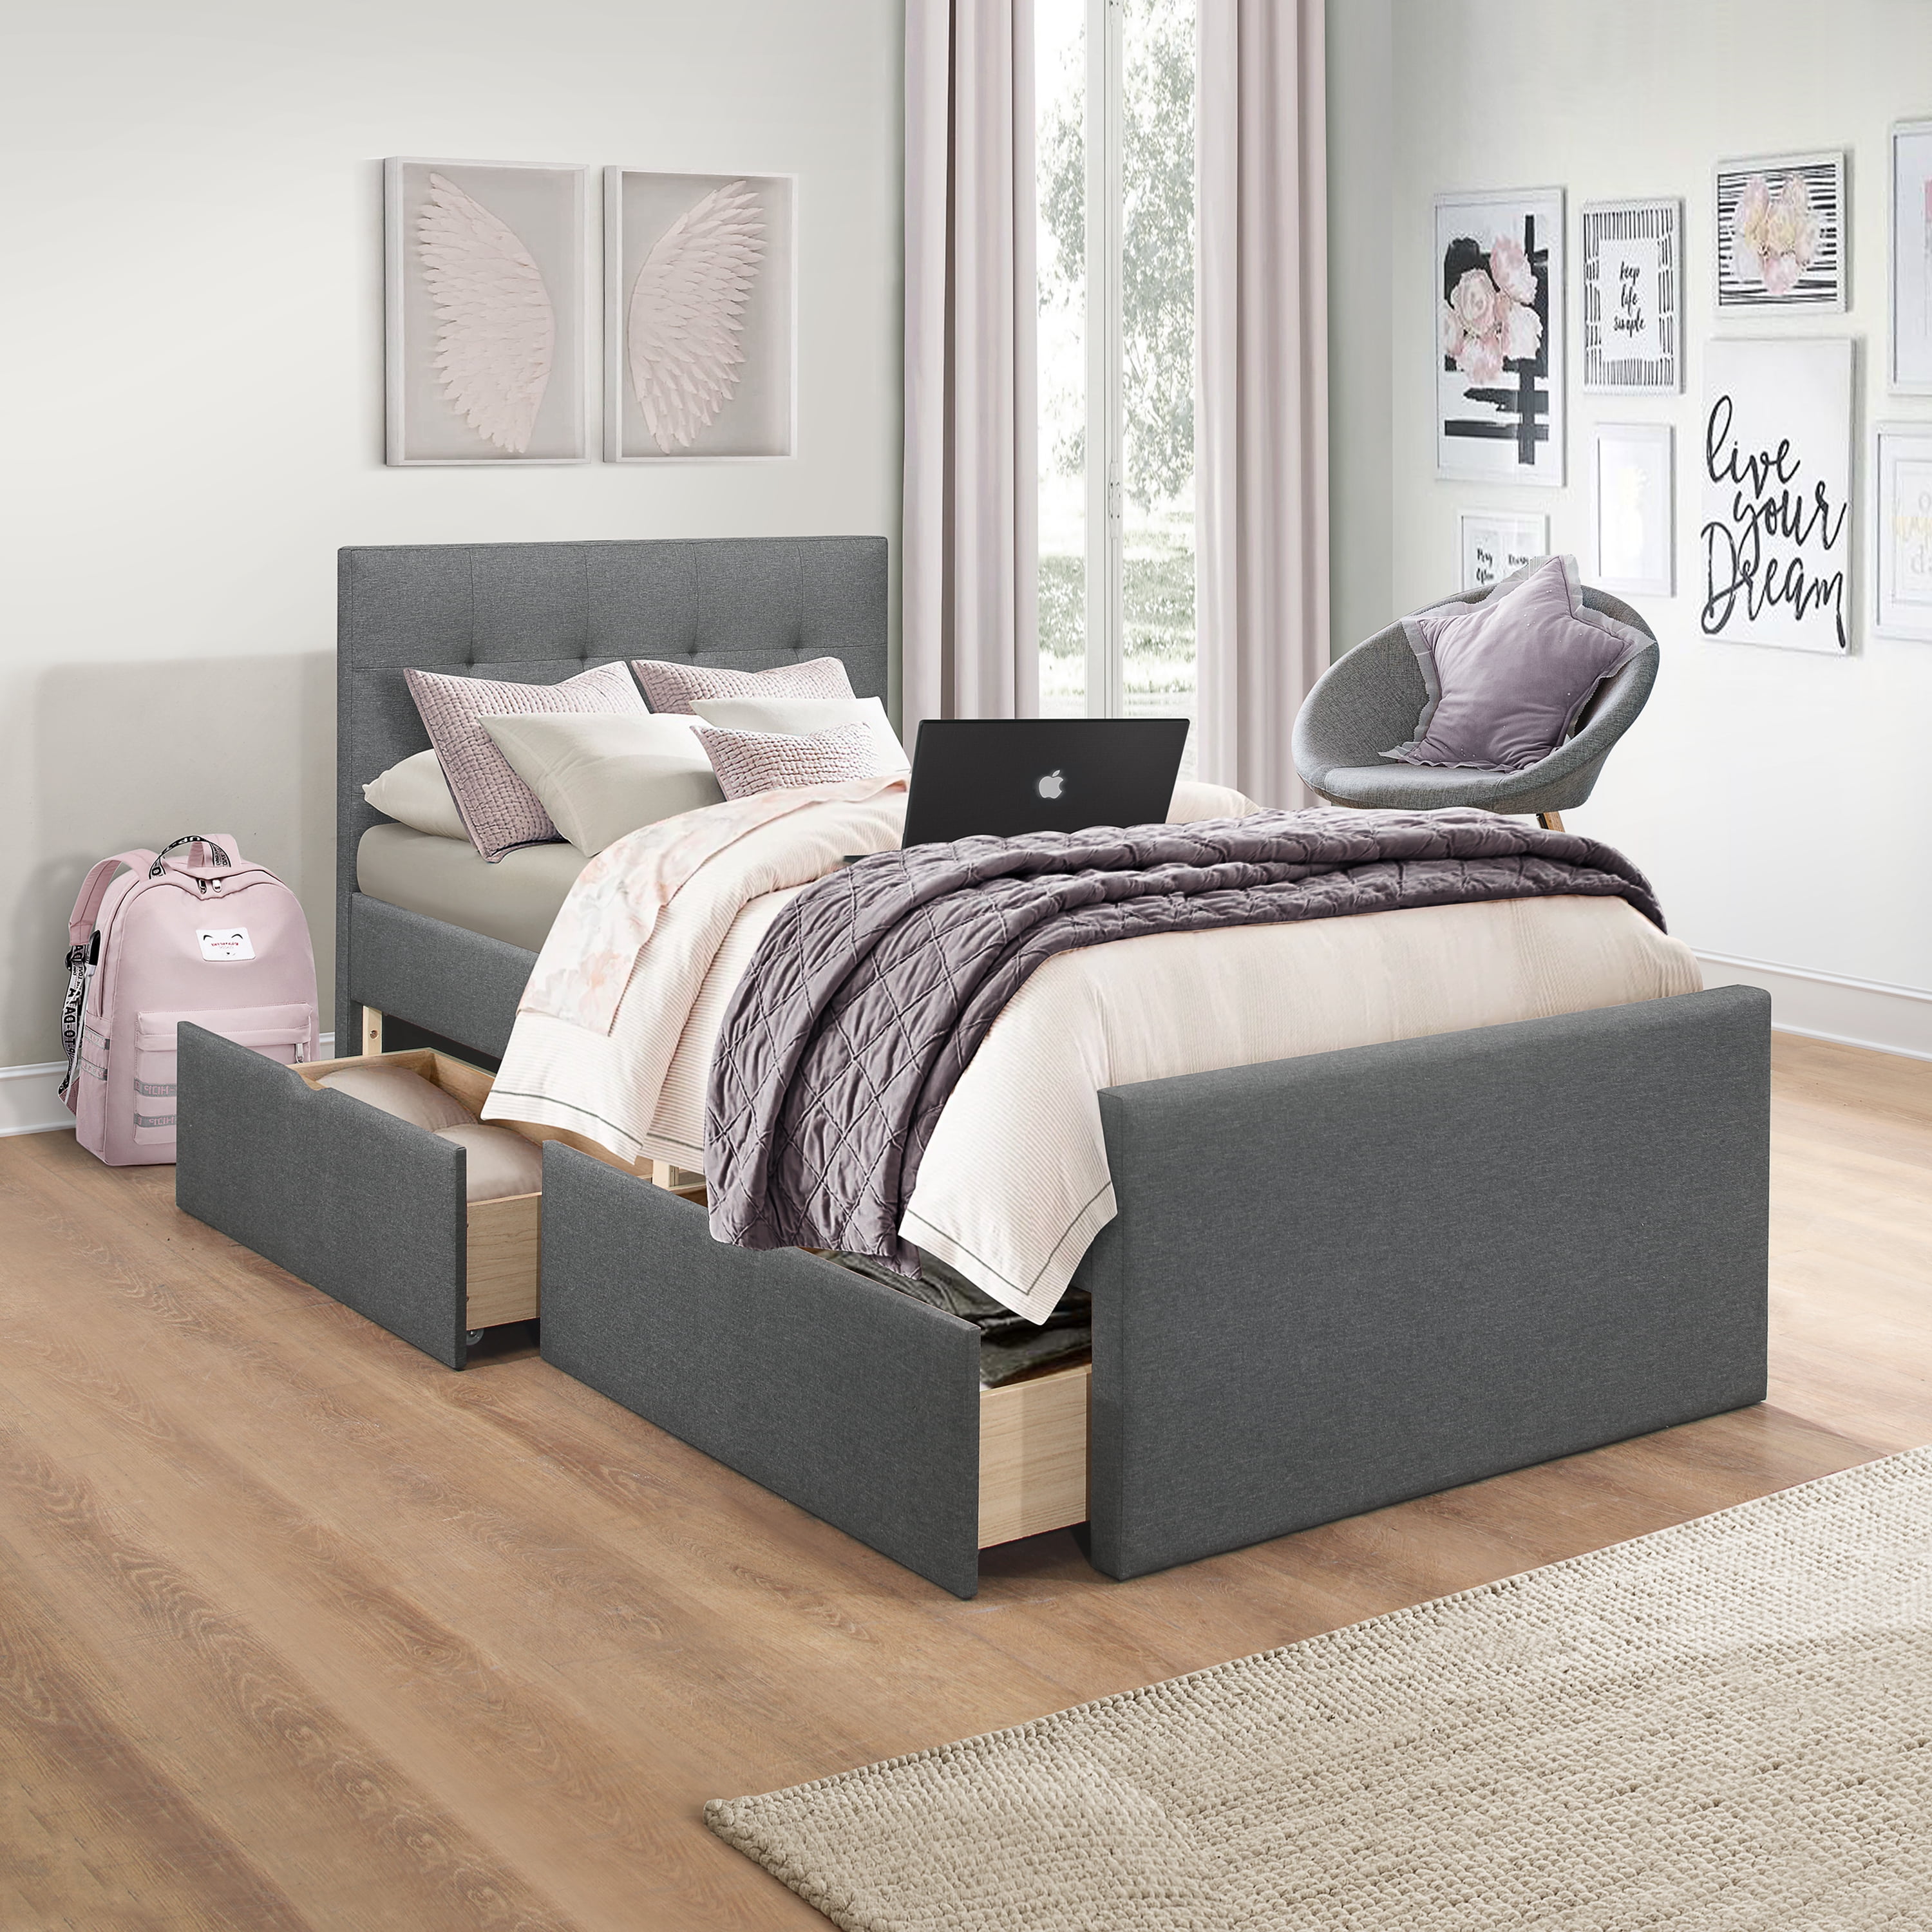 Emory Upholstered Twin Platform Bed, Grey Twin Bed